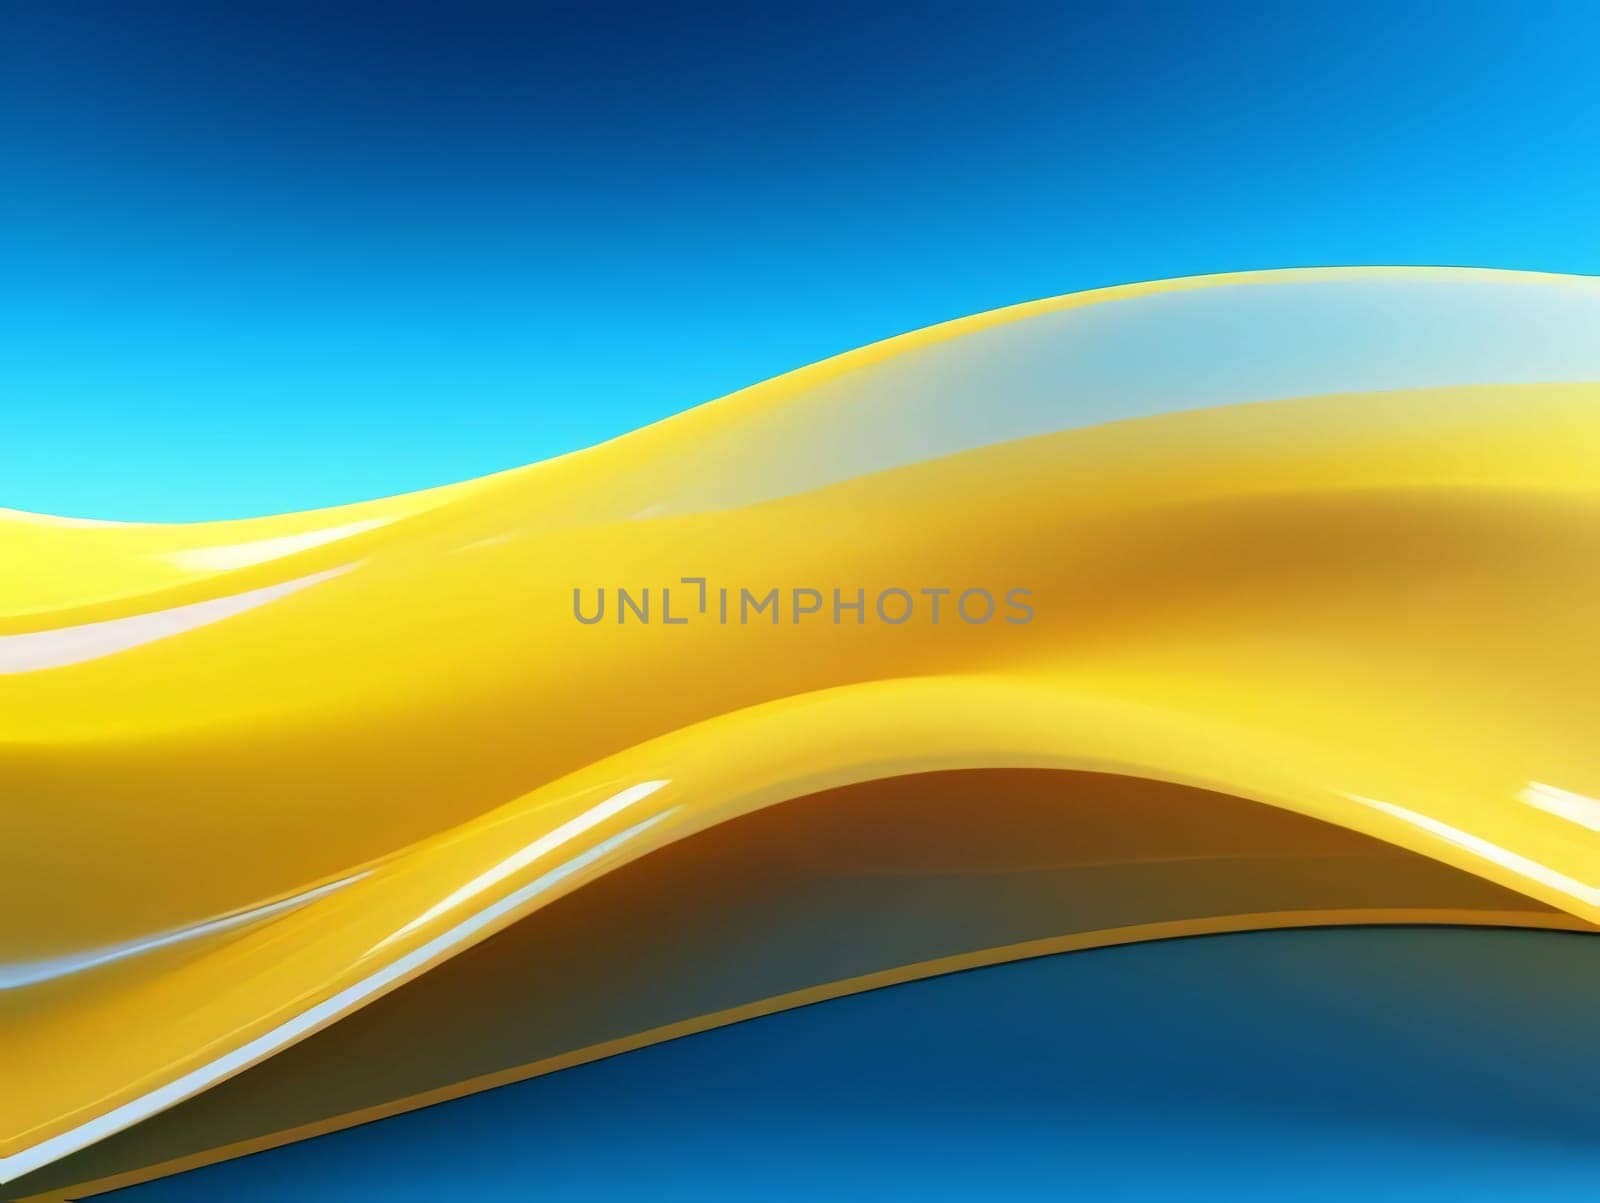 Abstract background design: Abstract 3d rendering of yellow and blue wavy background. Smooth glossy surface.